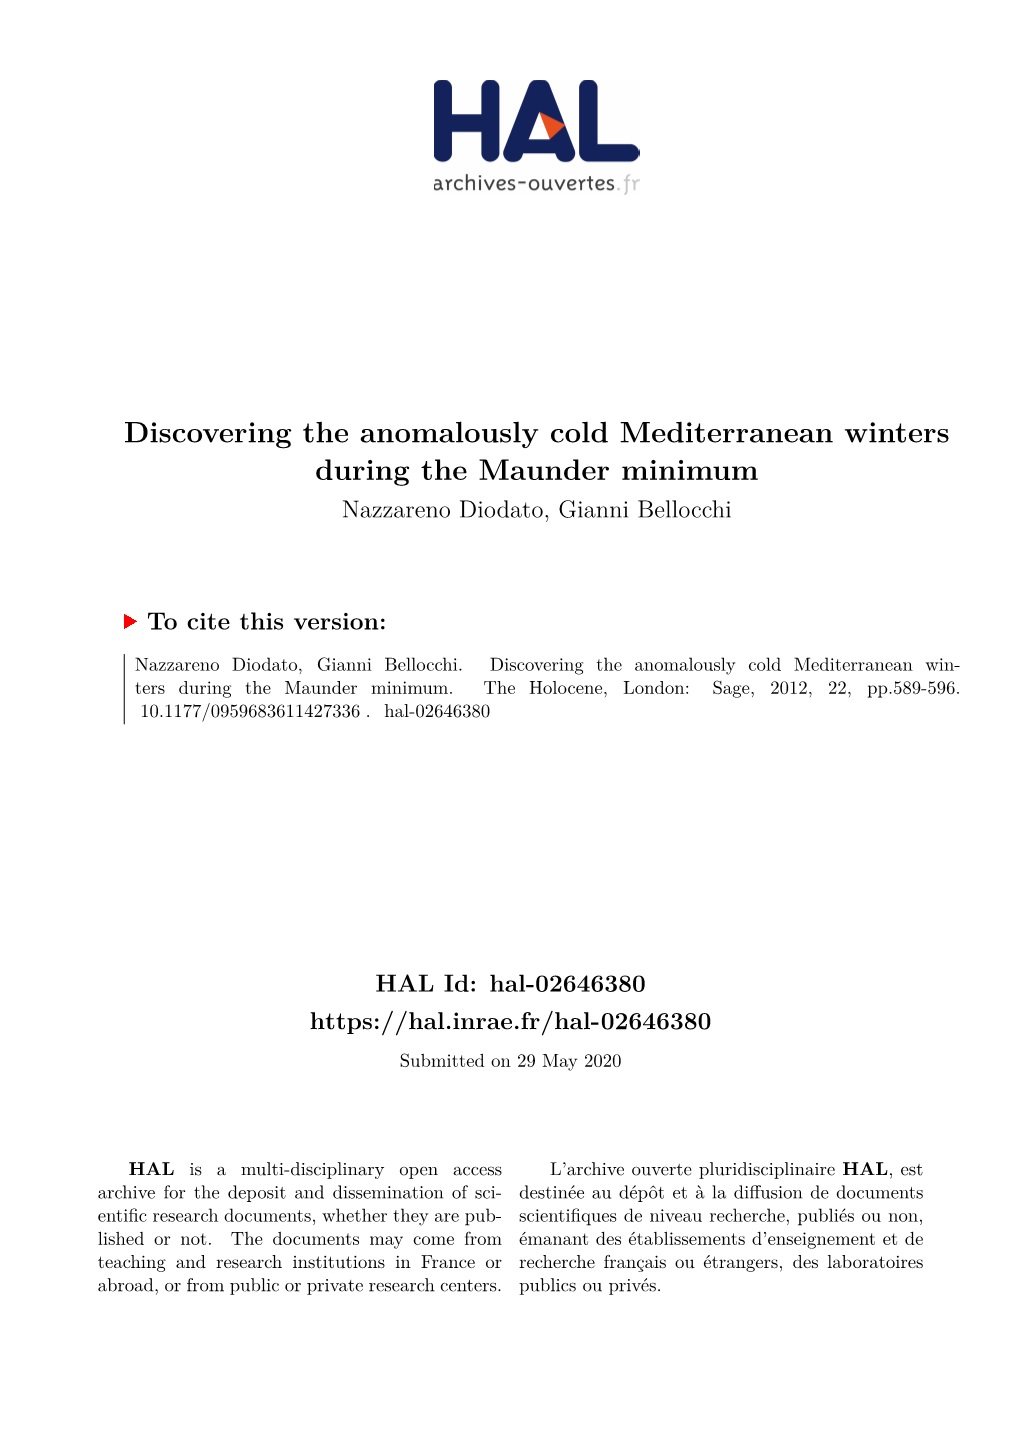 Discovering the Anomalously Cold Mediterranean Winters During the Maunder Minimum Nazzareno Diodato, Gianni Bellocchi